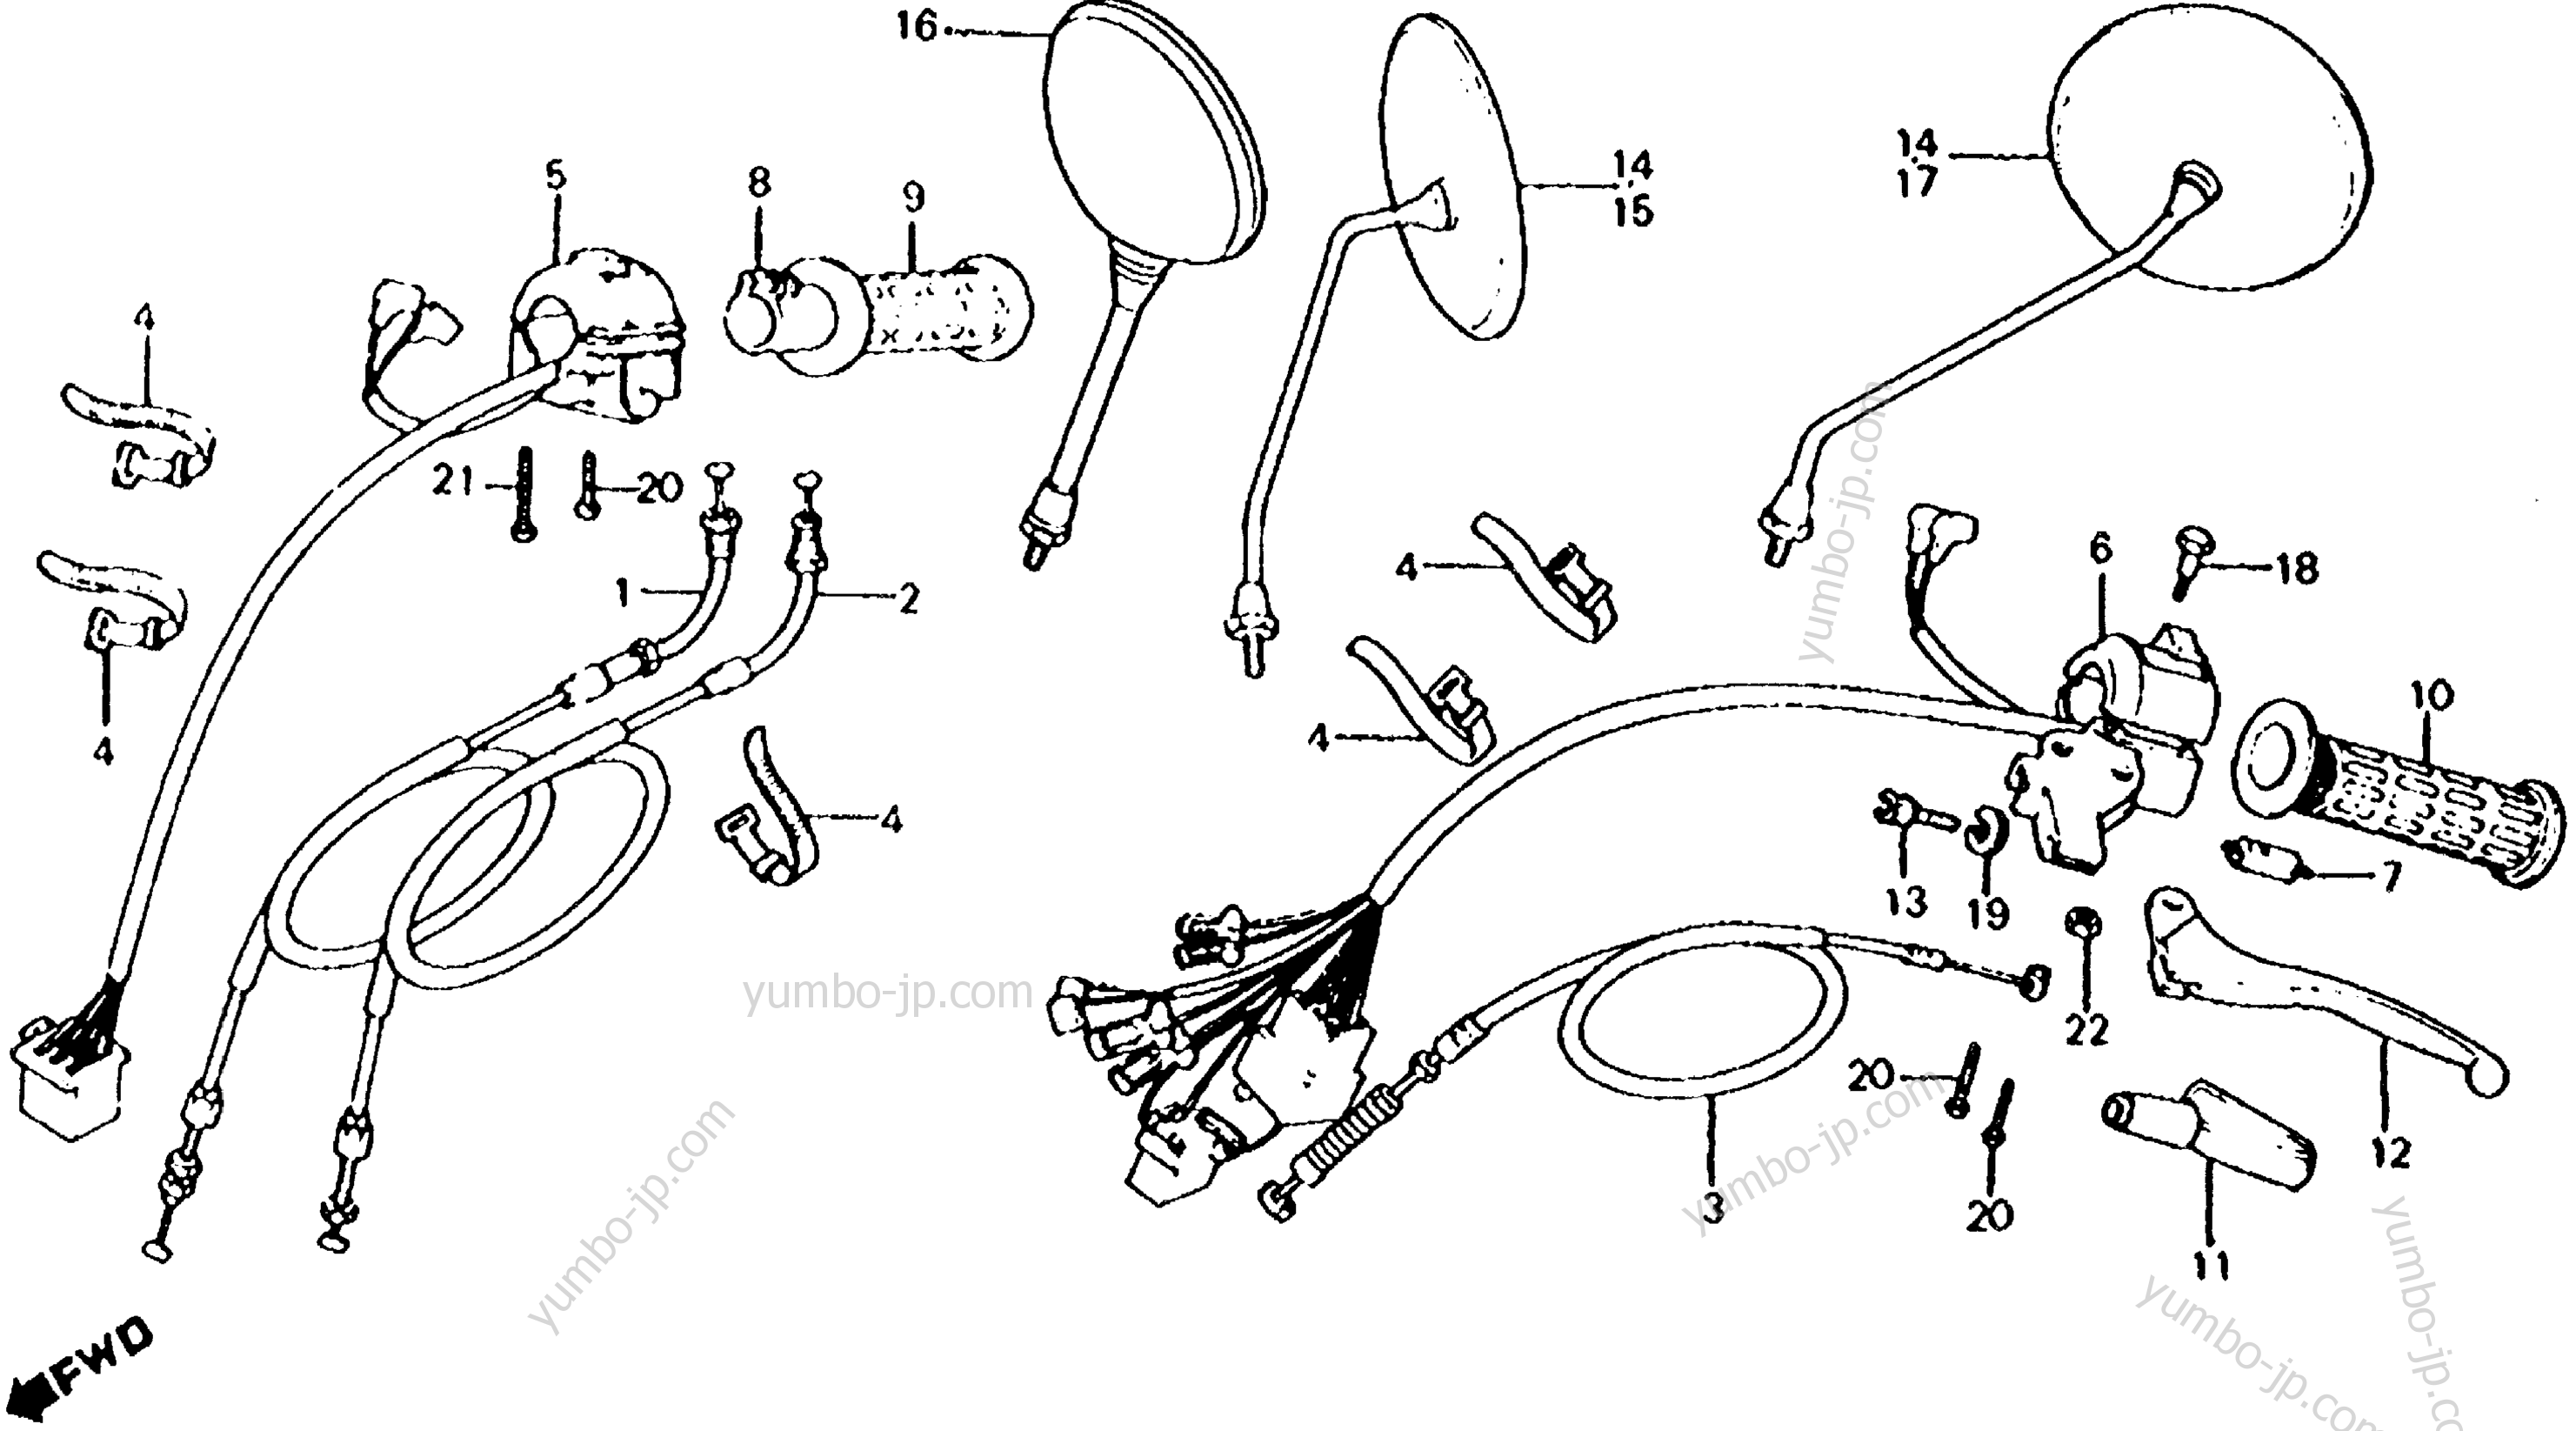 CABLES / SWITCHES / MIRROR for motorcycles HONDA CX500C A 1981 year